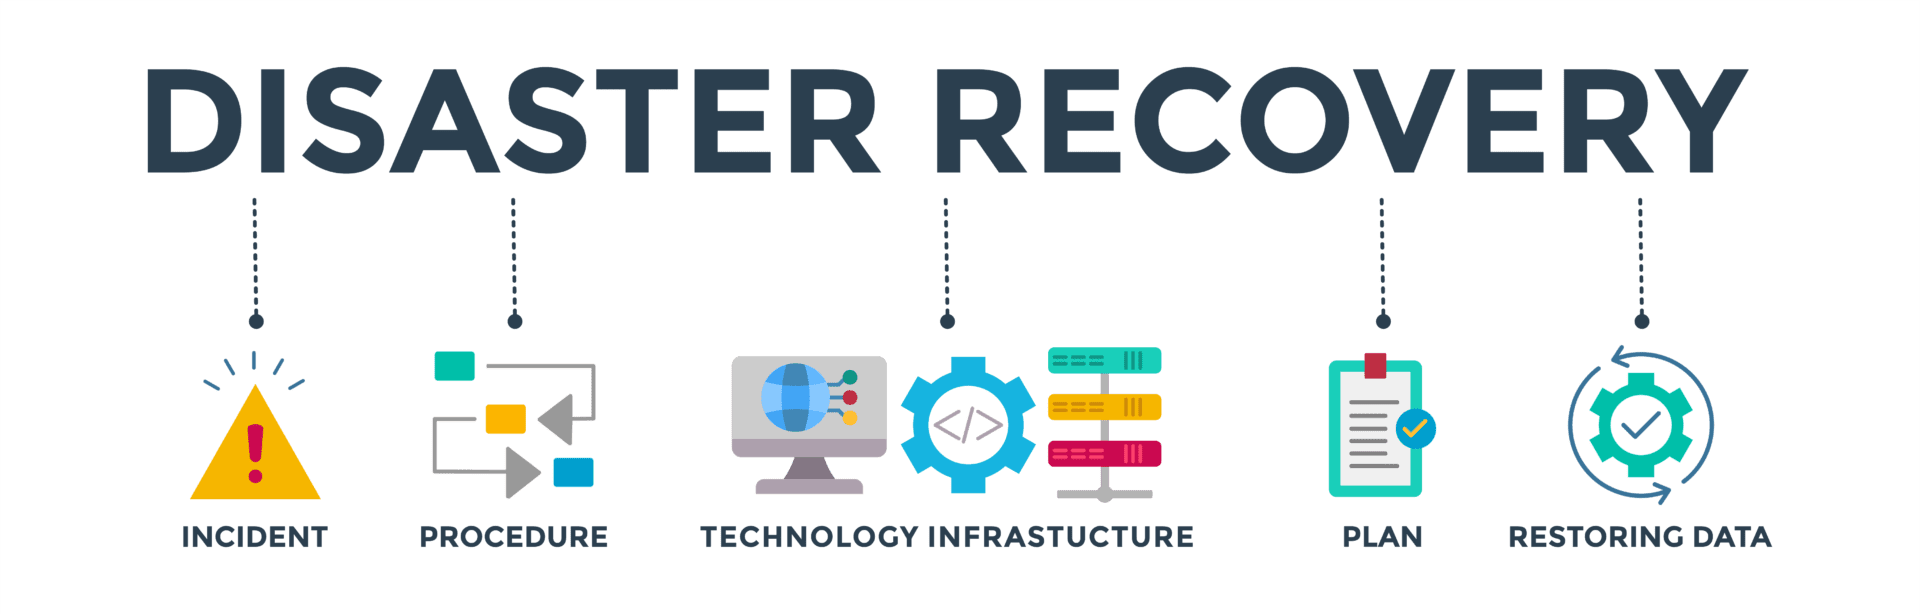 Disaster Recovery Playbook